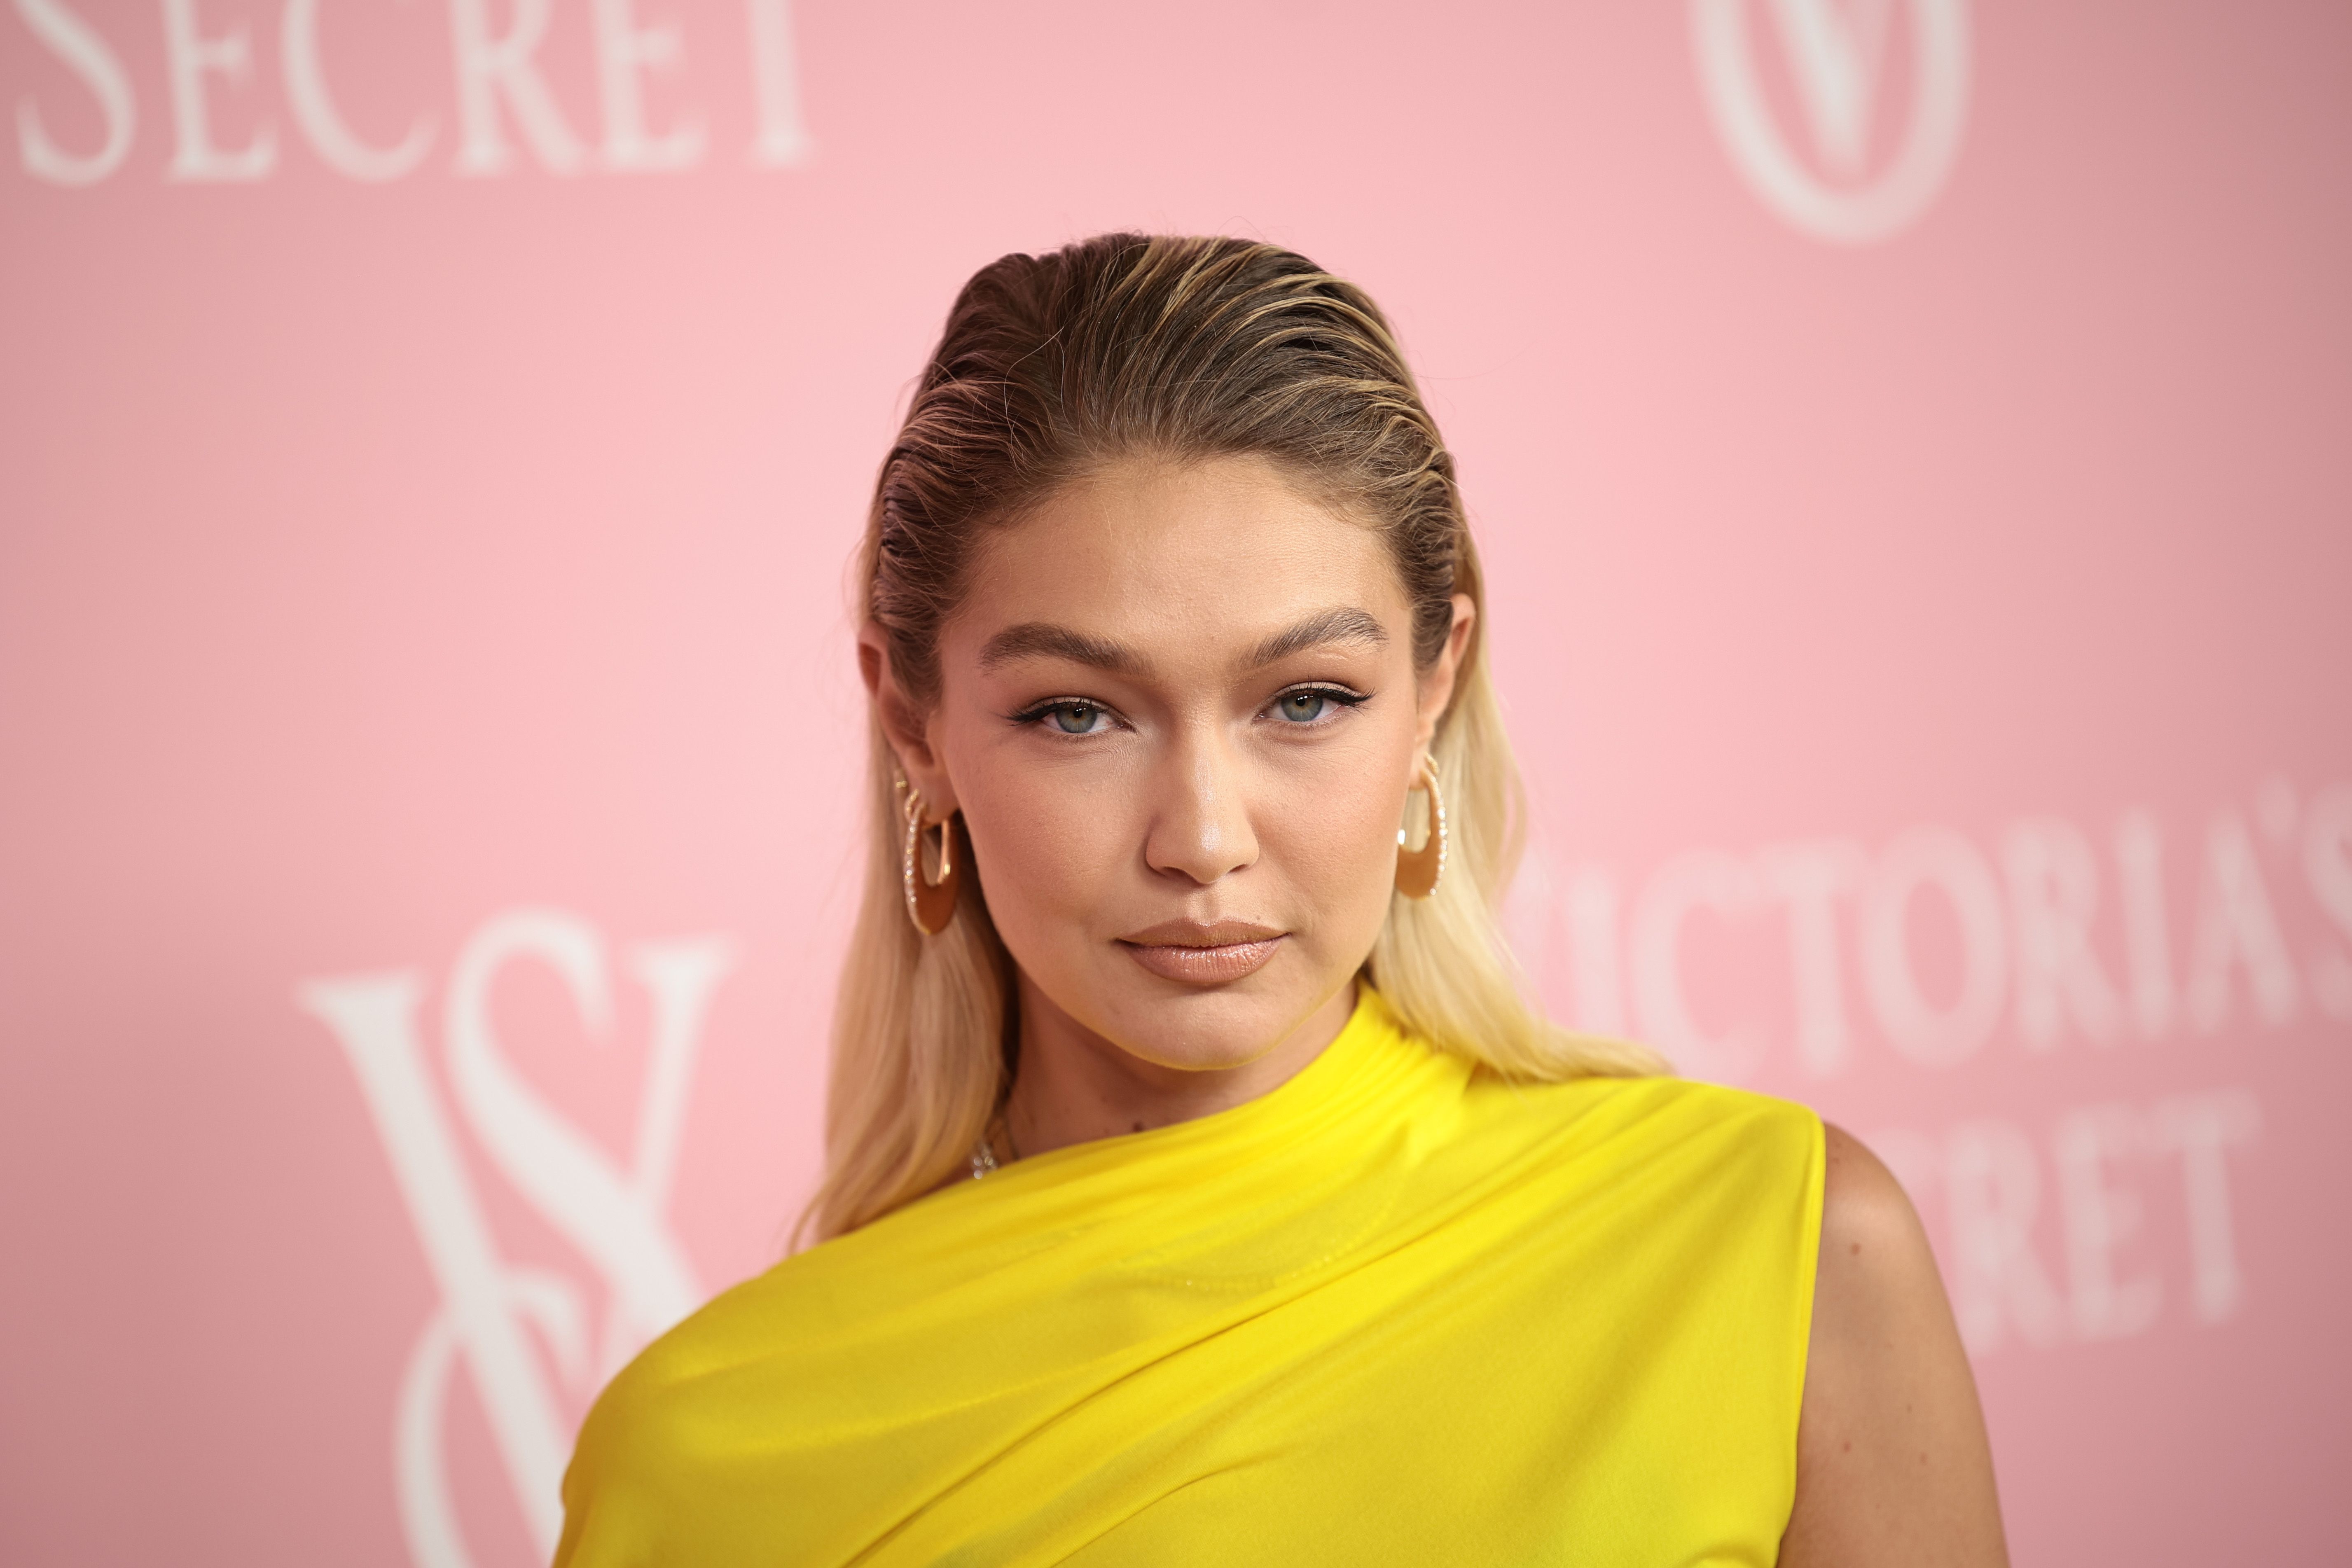 Gigi Hadid and More of the Bestest Party Pics This Week